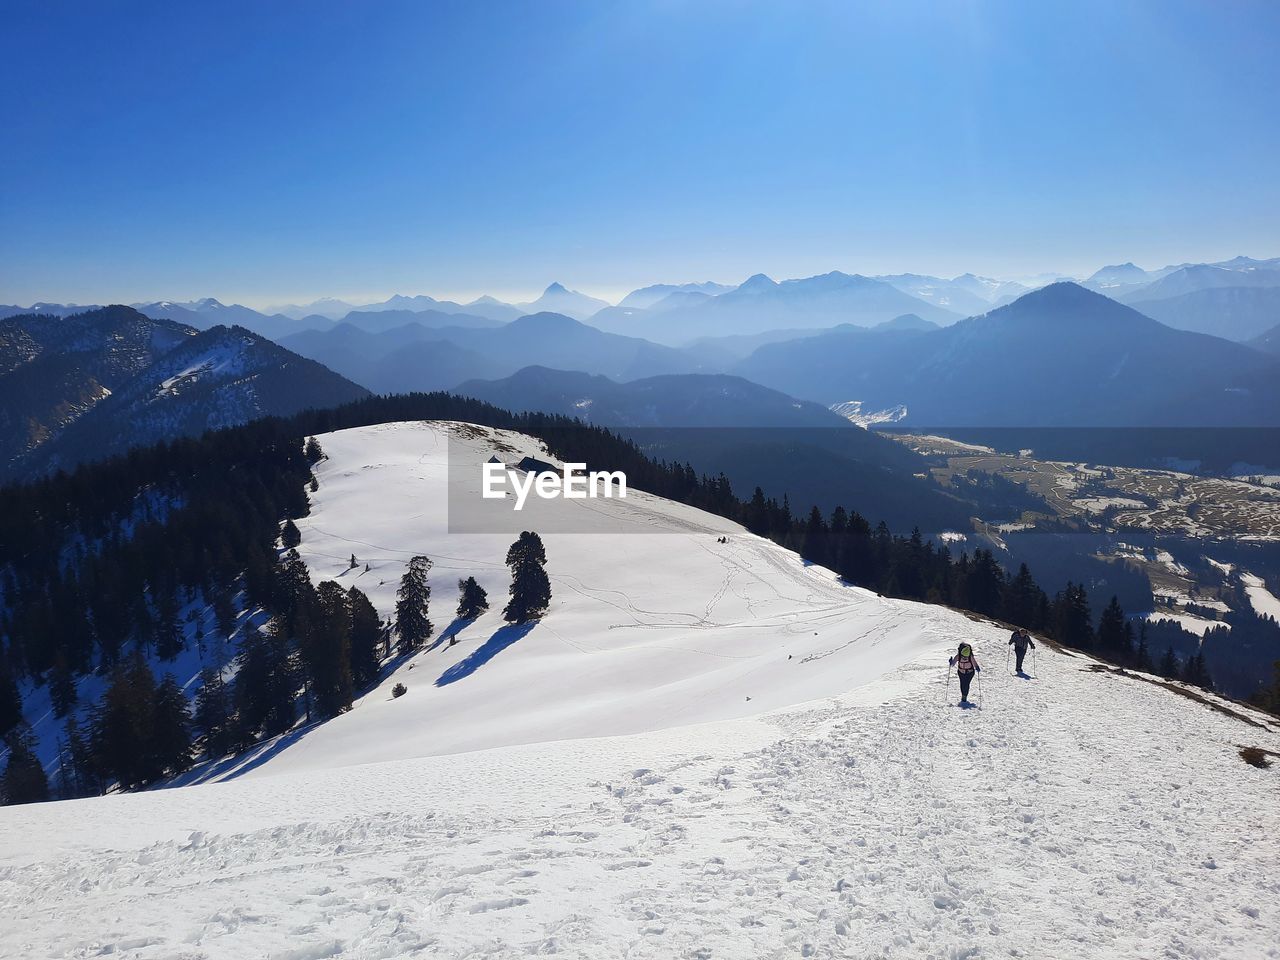 mountain, snow, cold temperature, winter, mountain range, sports, scenics - nature, winter sports, environment, leisure activity, sky, landscape, beauty in nature, nature, adventure, vacation, skiing, snowcapped mountain, holiday, trip, travel, travel destinations, activity, blue, sunlight, ski holiday, ski mountaineering, tree, day, land, non-urban scene, ski touring, piste, lifestyles, extreme sports, adult, forest, group of people, outdoors, tranquil scene, tourism, coniferous tree, pinaceae, ridge, hiking, men, motion, ski equipment, recreation, tranquility, plant, pine tree, full length, clear sky, ski